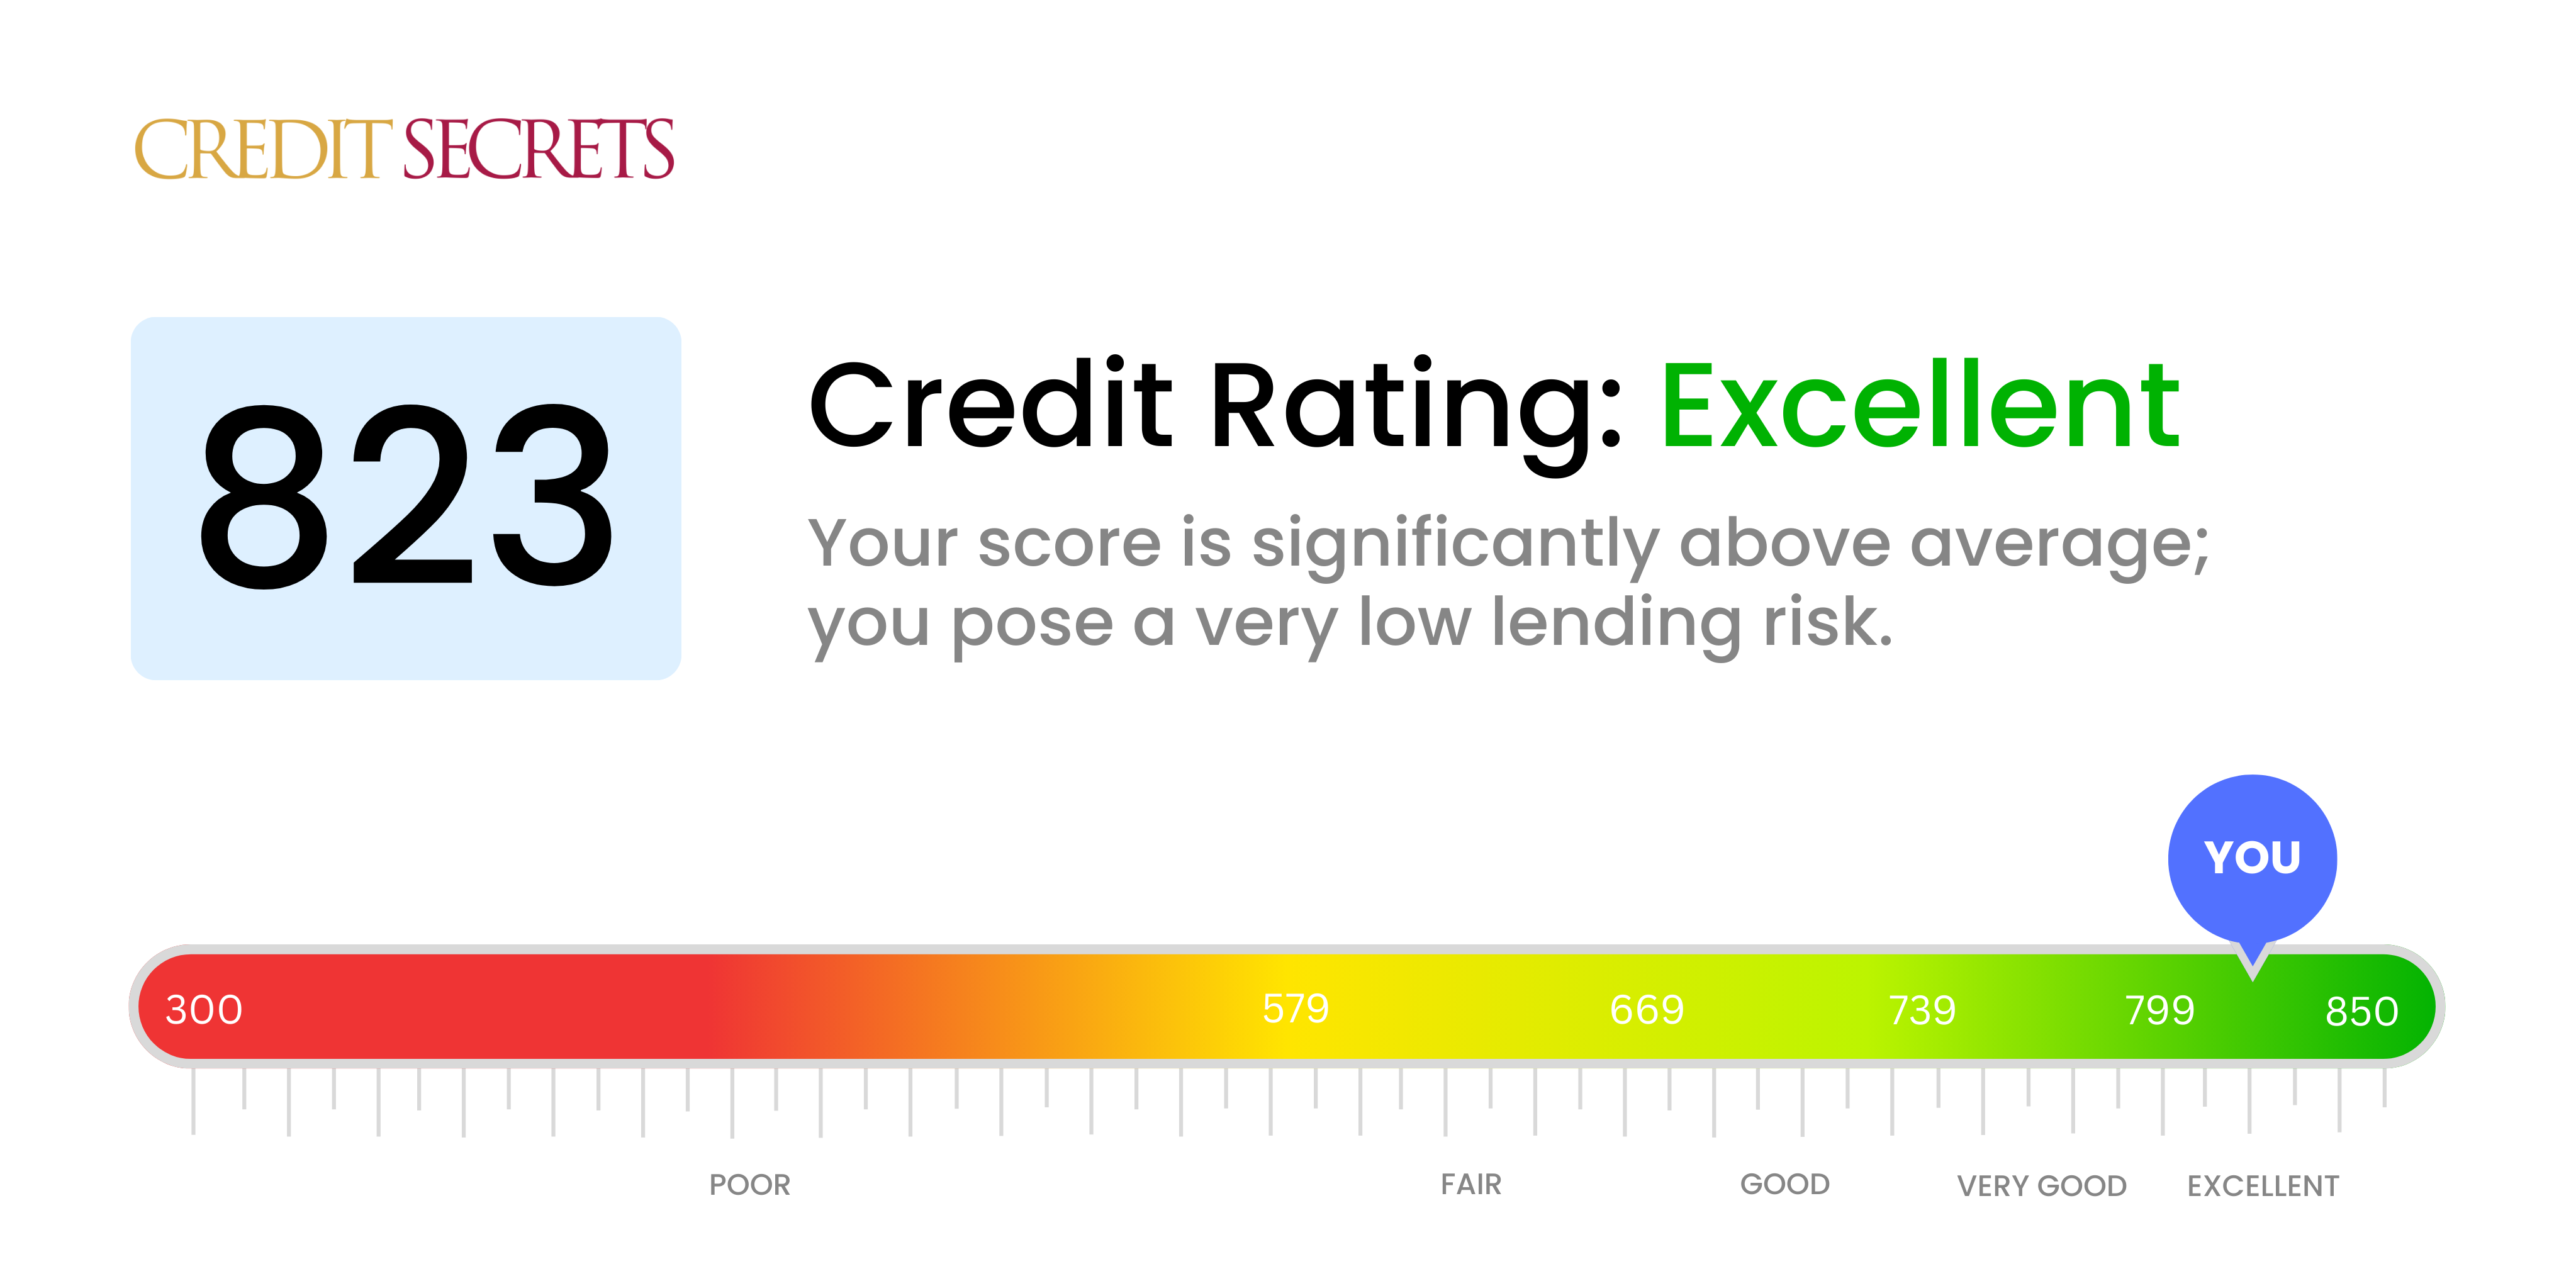 Is 823 a good credit score?